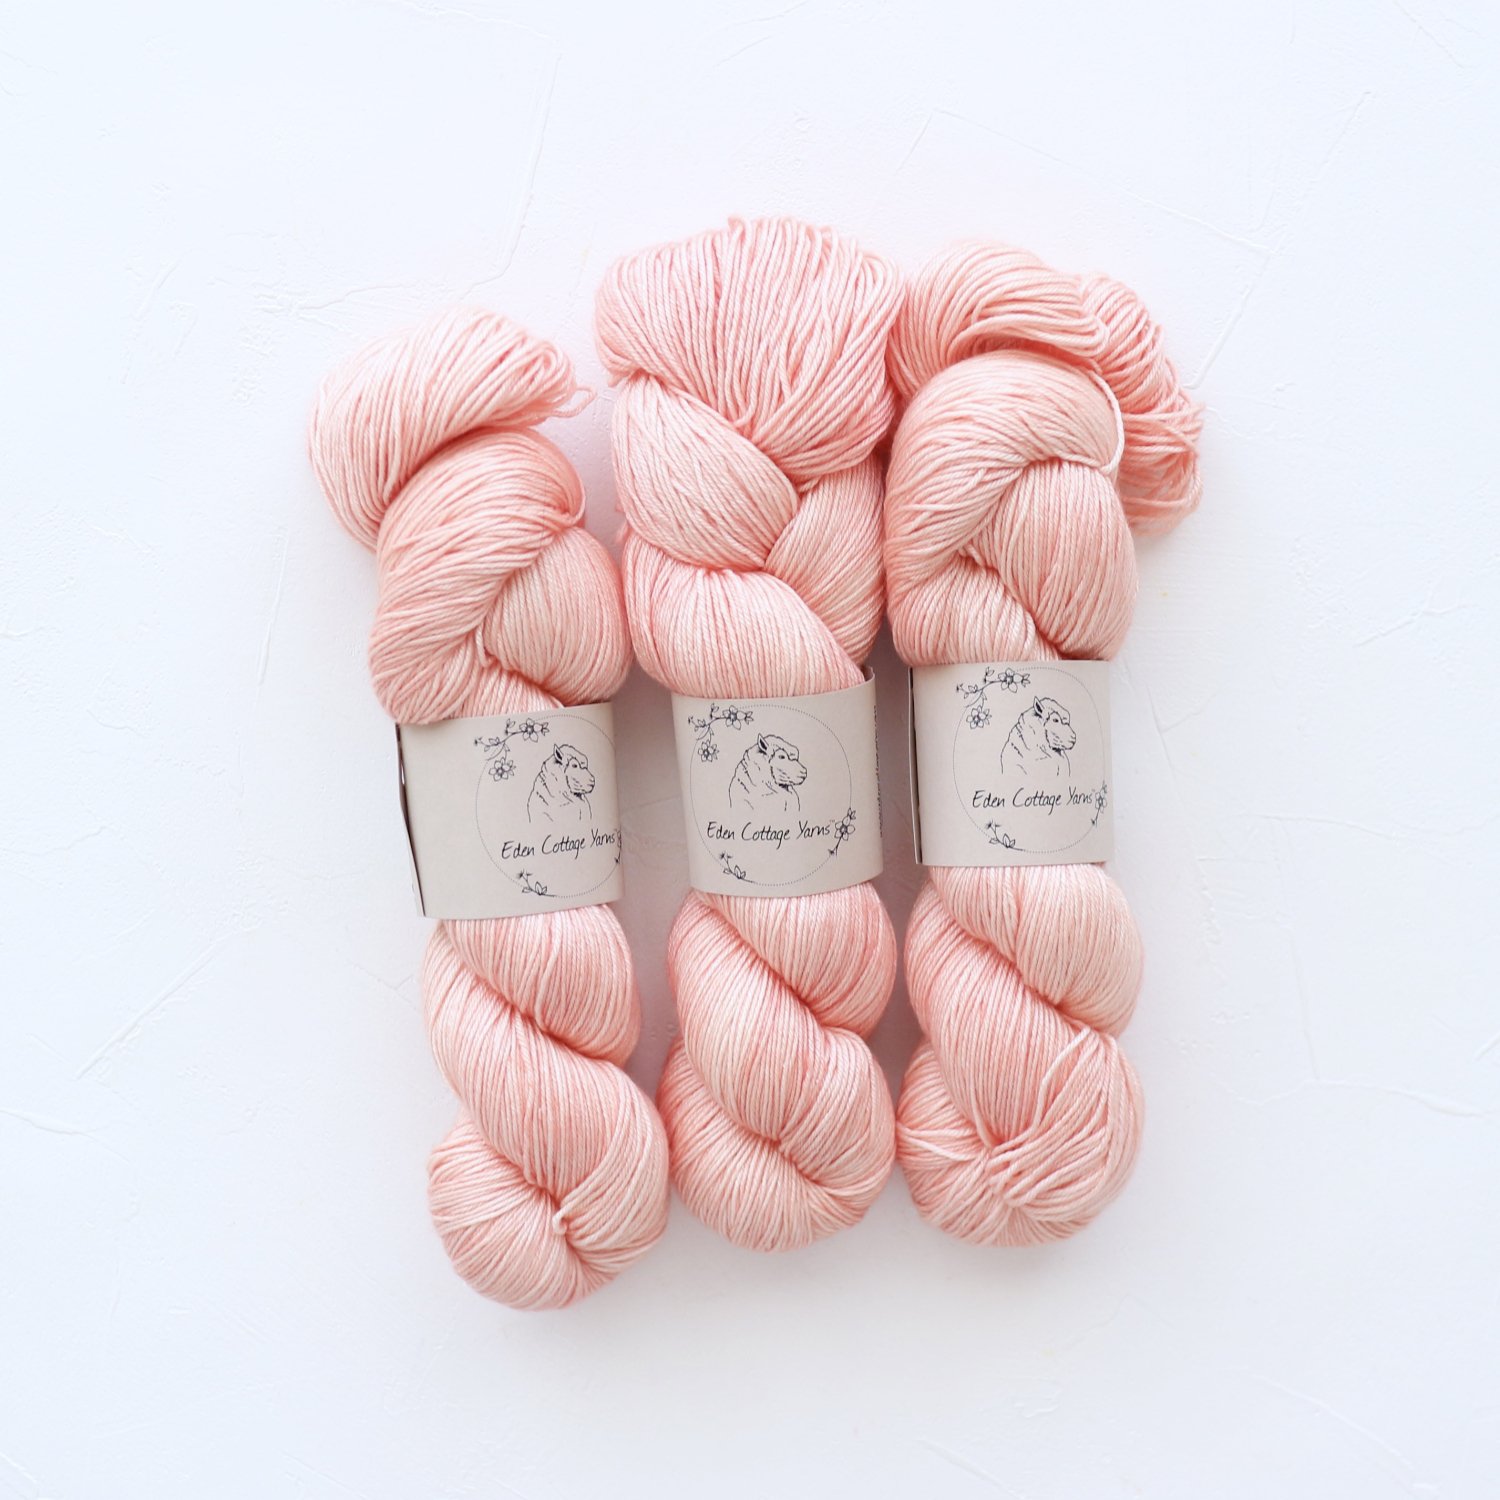 Eden Cottage Yarns<br>Titus 4ply<br>Apricot Tulip